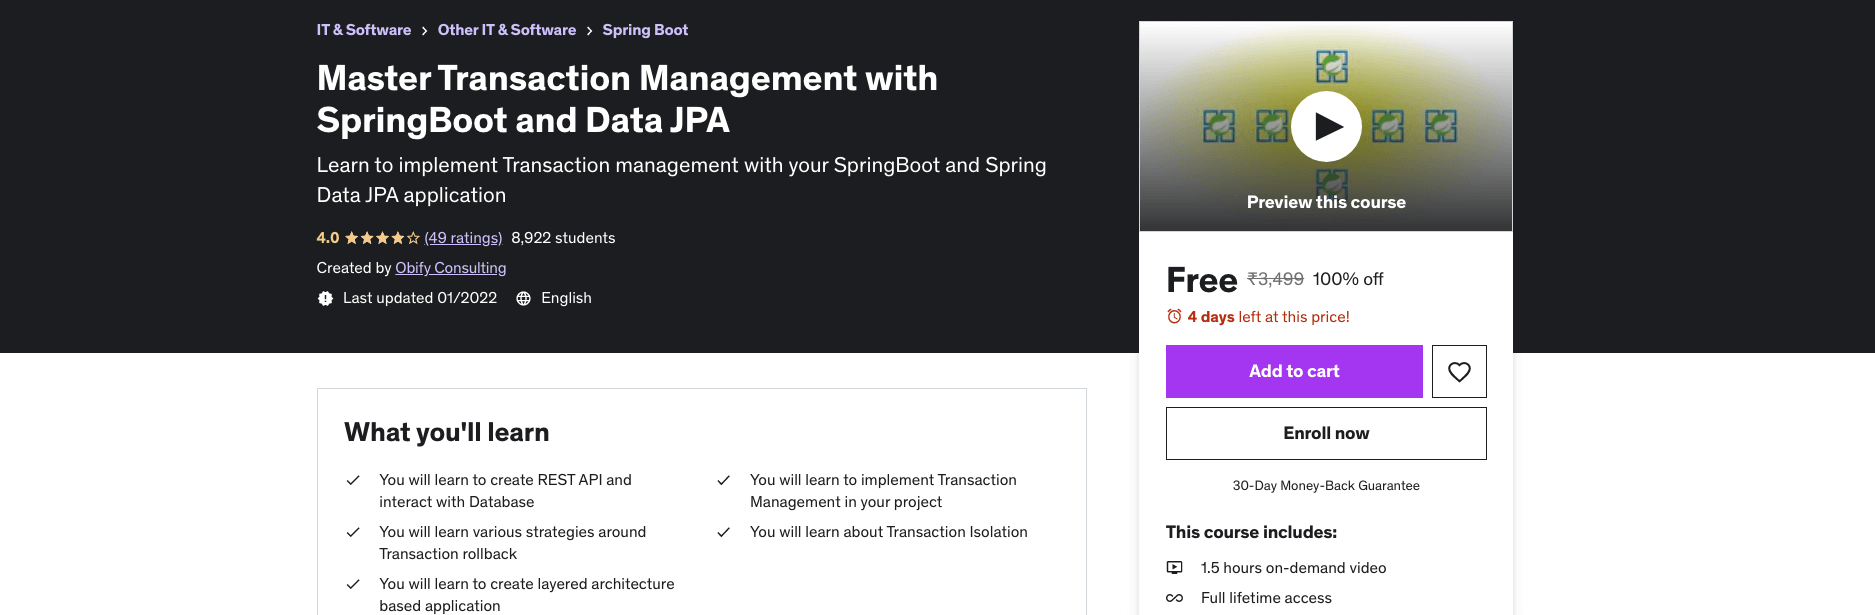 Master Transaction Management with SpringBoot and Data JPA